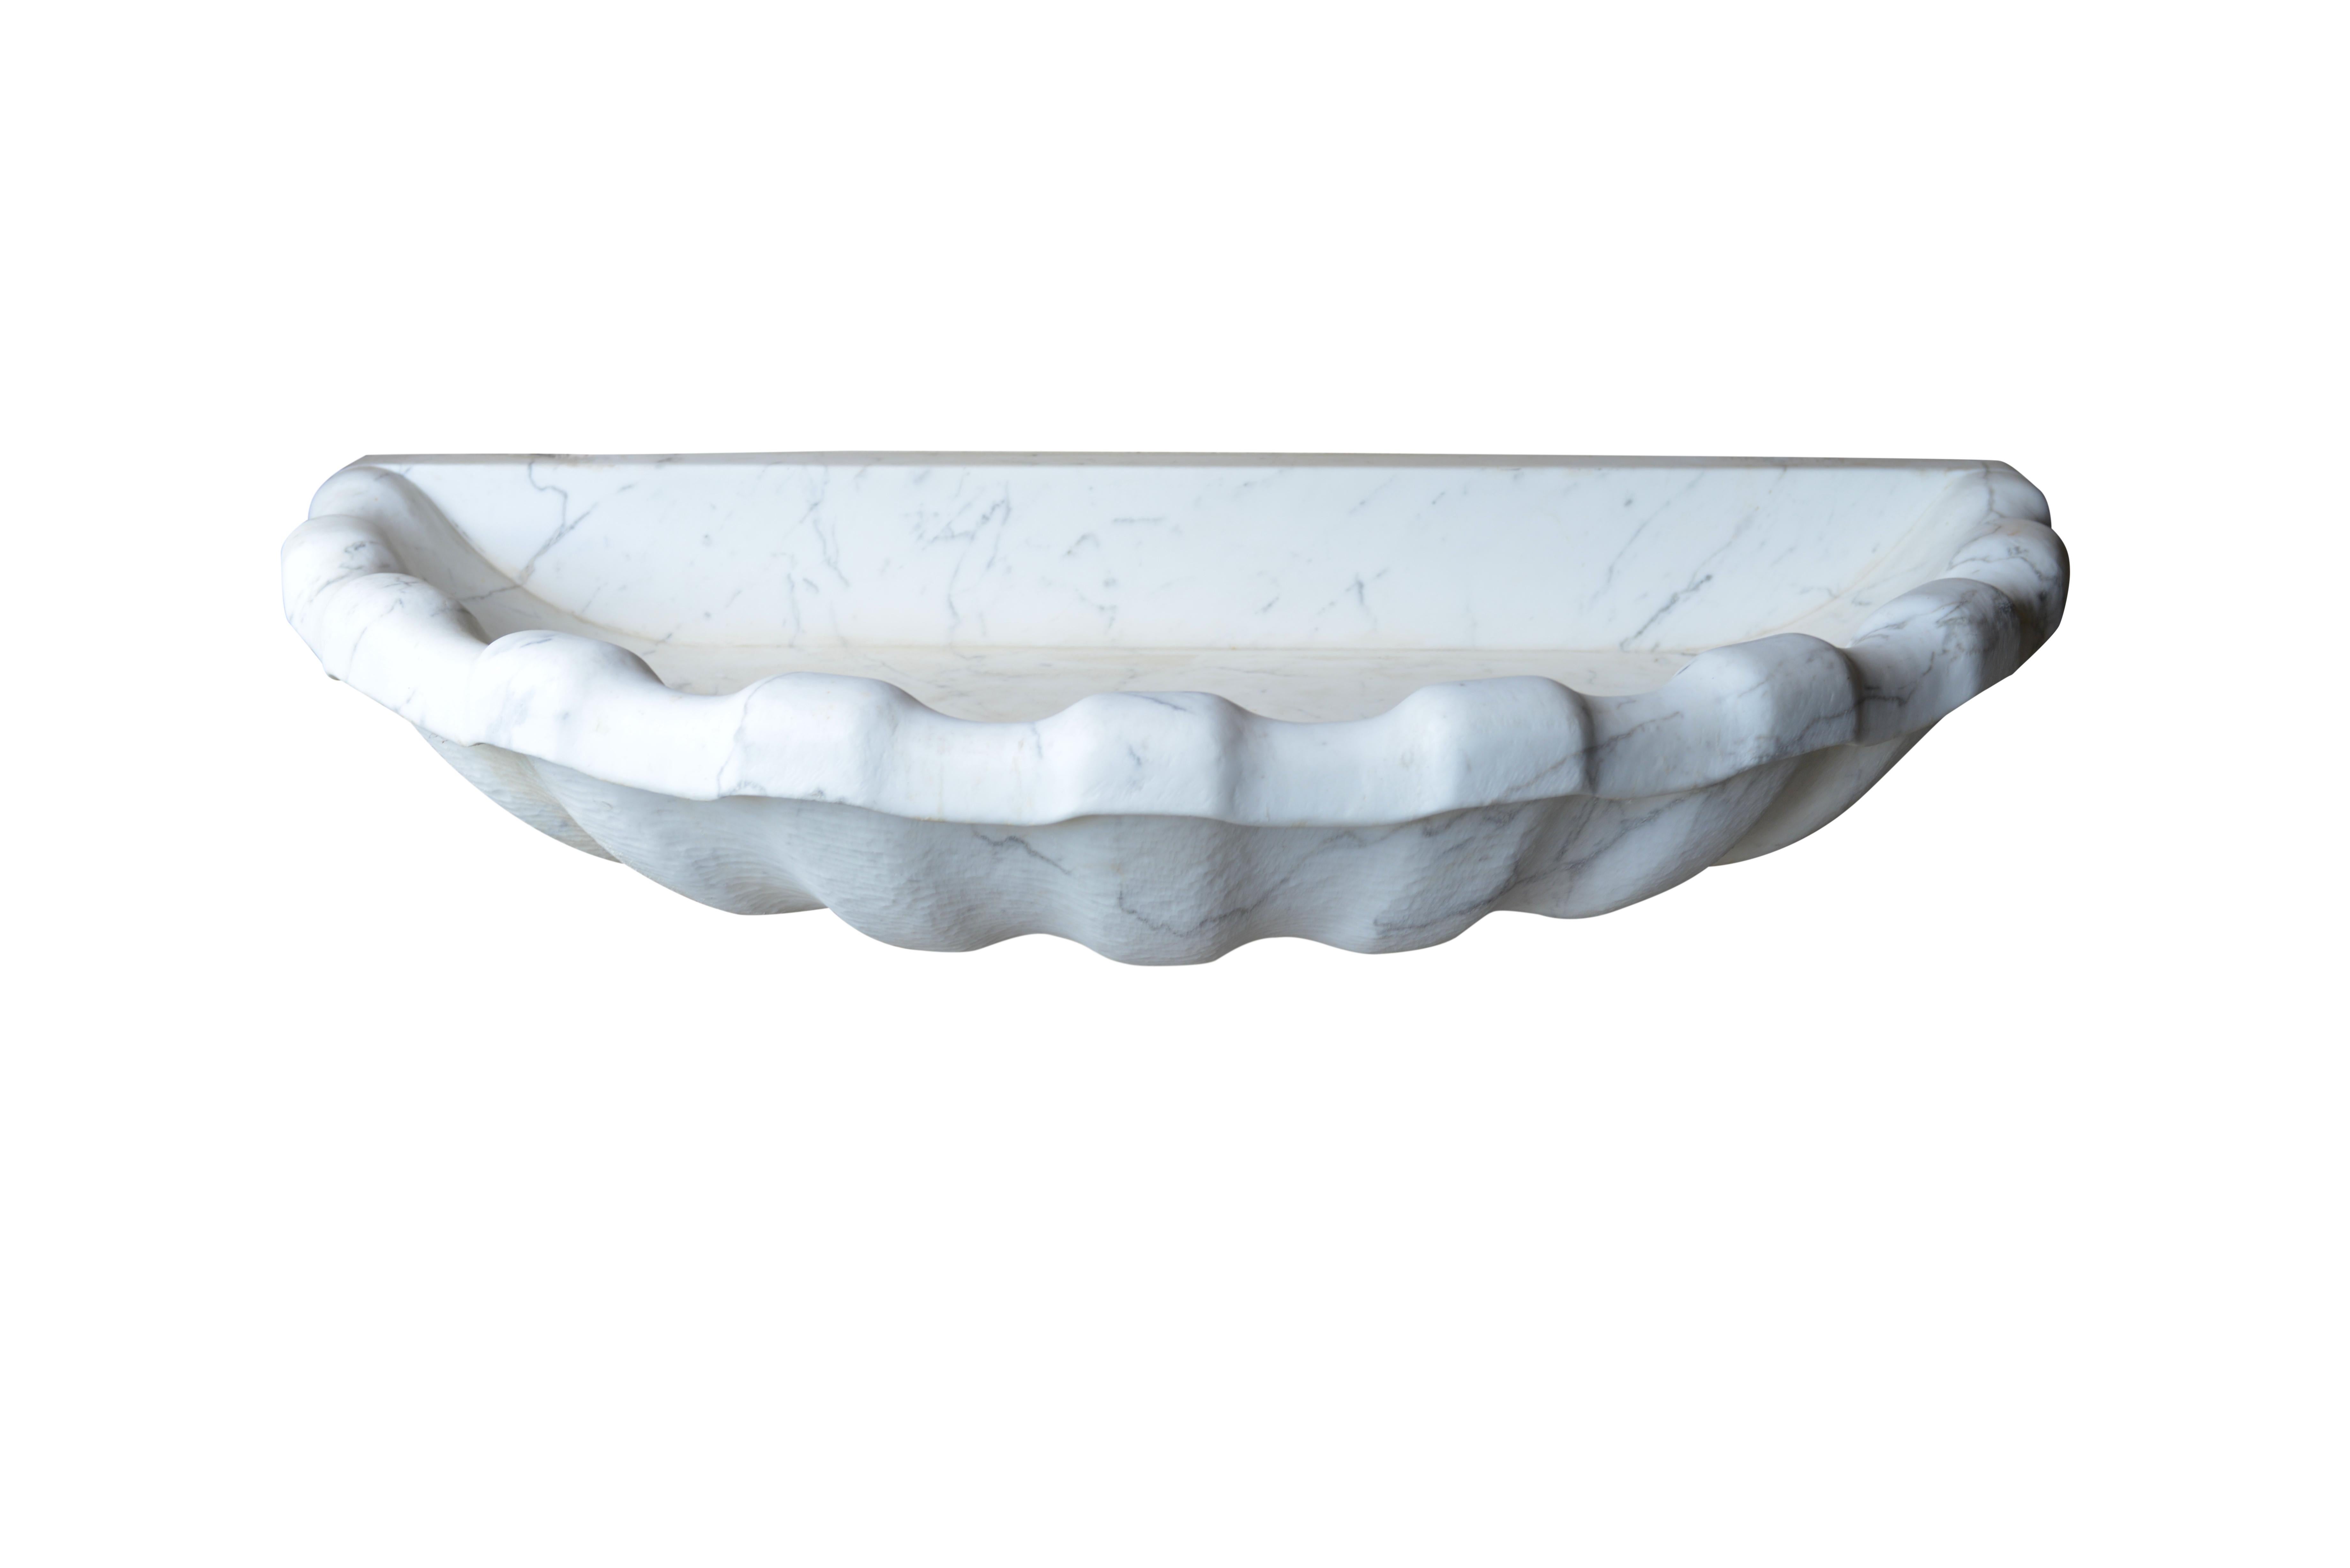 Magnificent over the top and out of proportion hand carved white Carrara marble classical style shell sink or shell cascading fountain. Carrara is a white marble quarried in the city of Carrara located in the province of Massa and Carrara in the